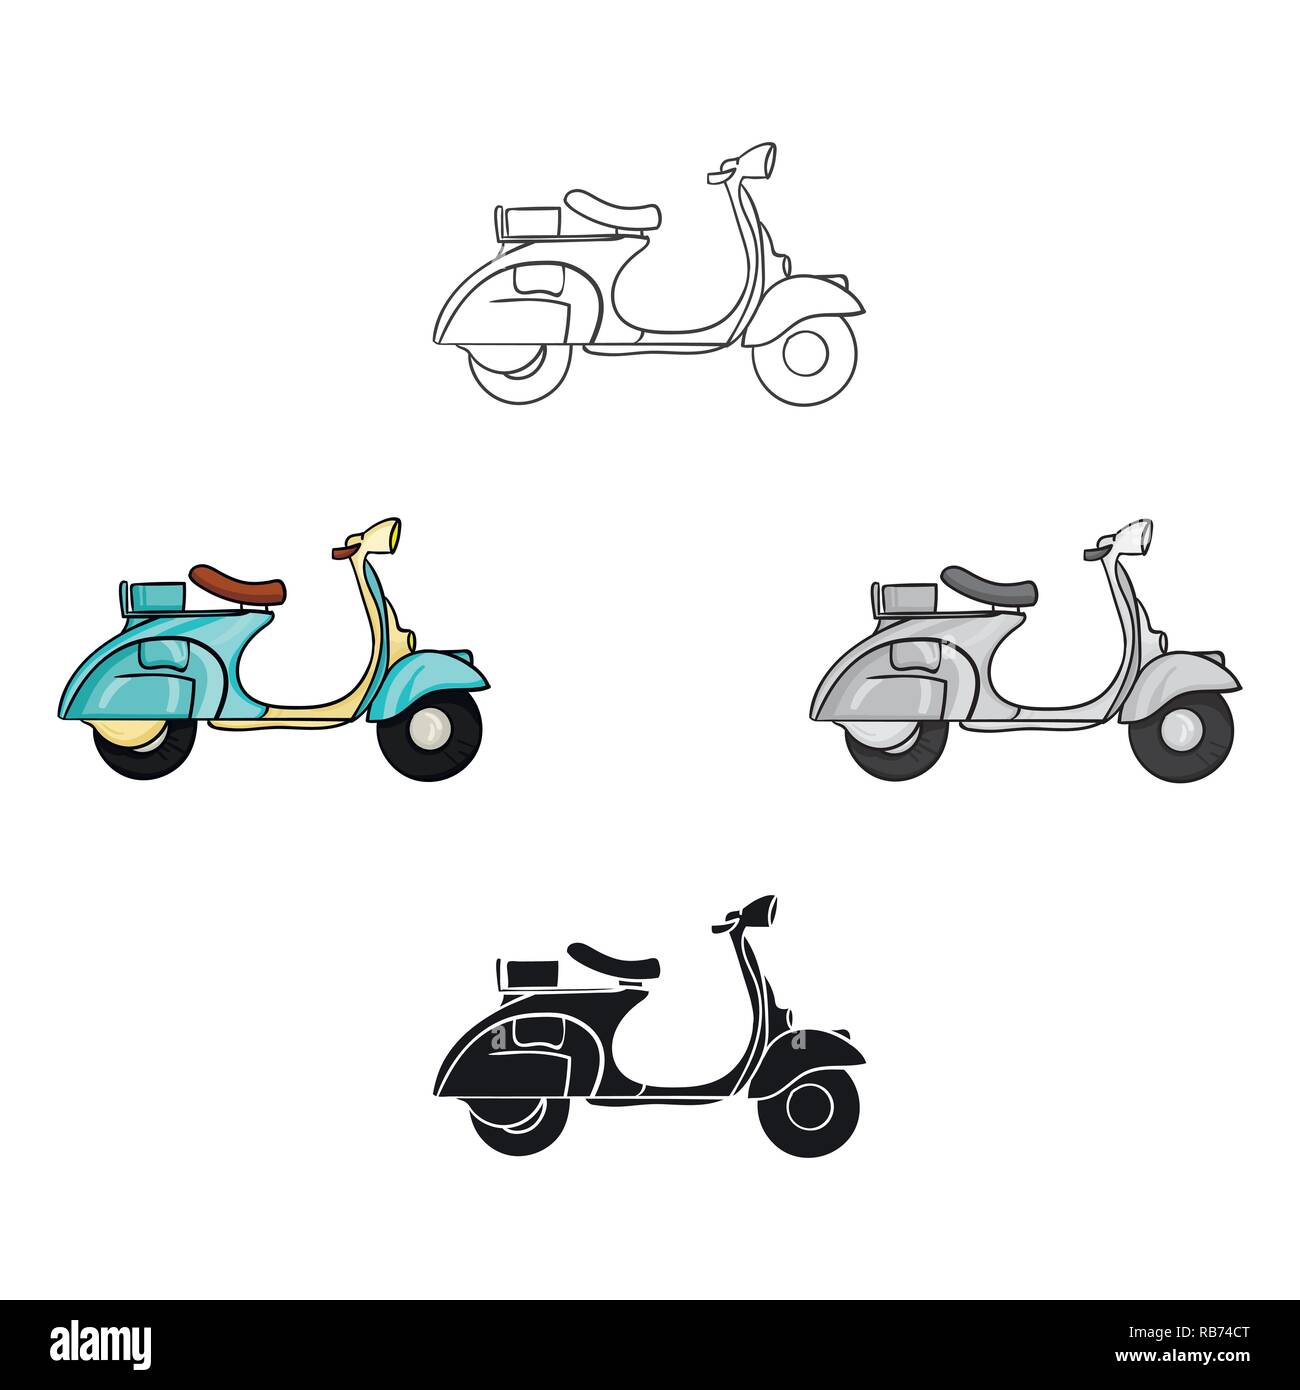 art,background,bike,cartoon ,classic,country,design,hipster,icon,illustration,isolated,italian,italy, logo,motor,motorcycle,old,retro,ride,road,scooter,speed,style,symbol,transport,transportation,travel,urban,vector,vehicle,vespa,vintage,web,wheel  ...